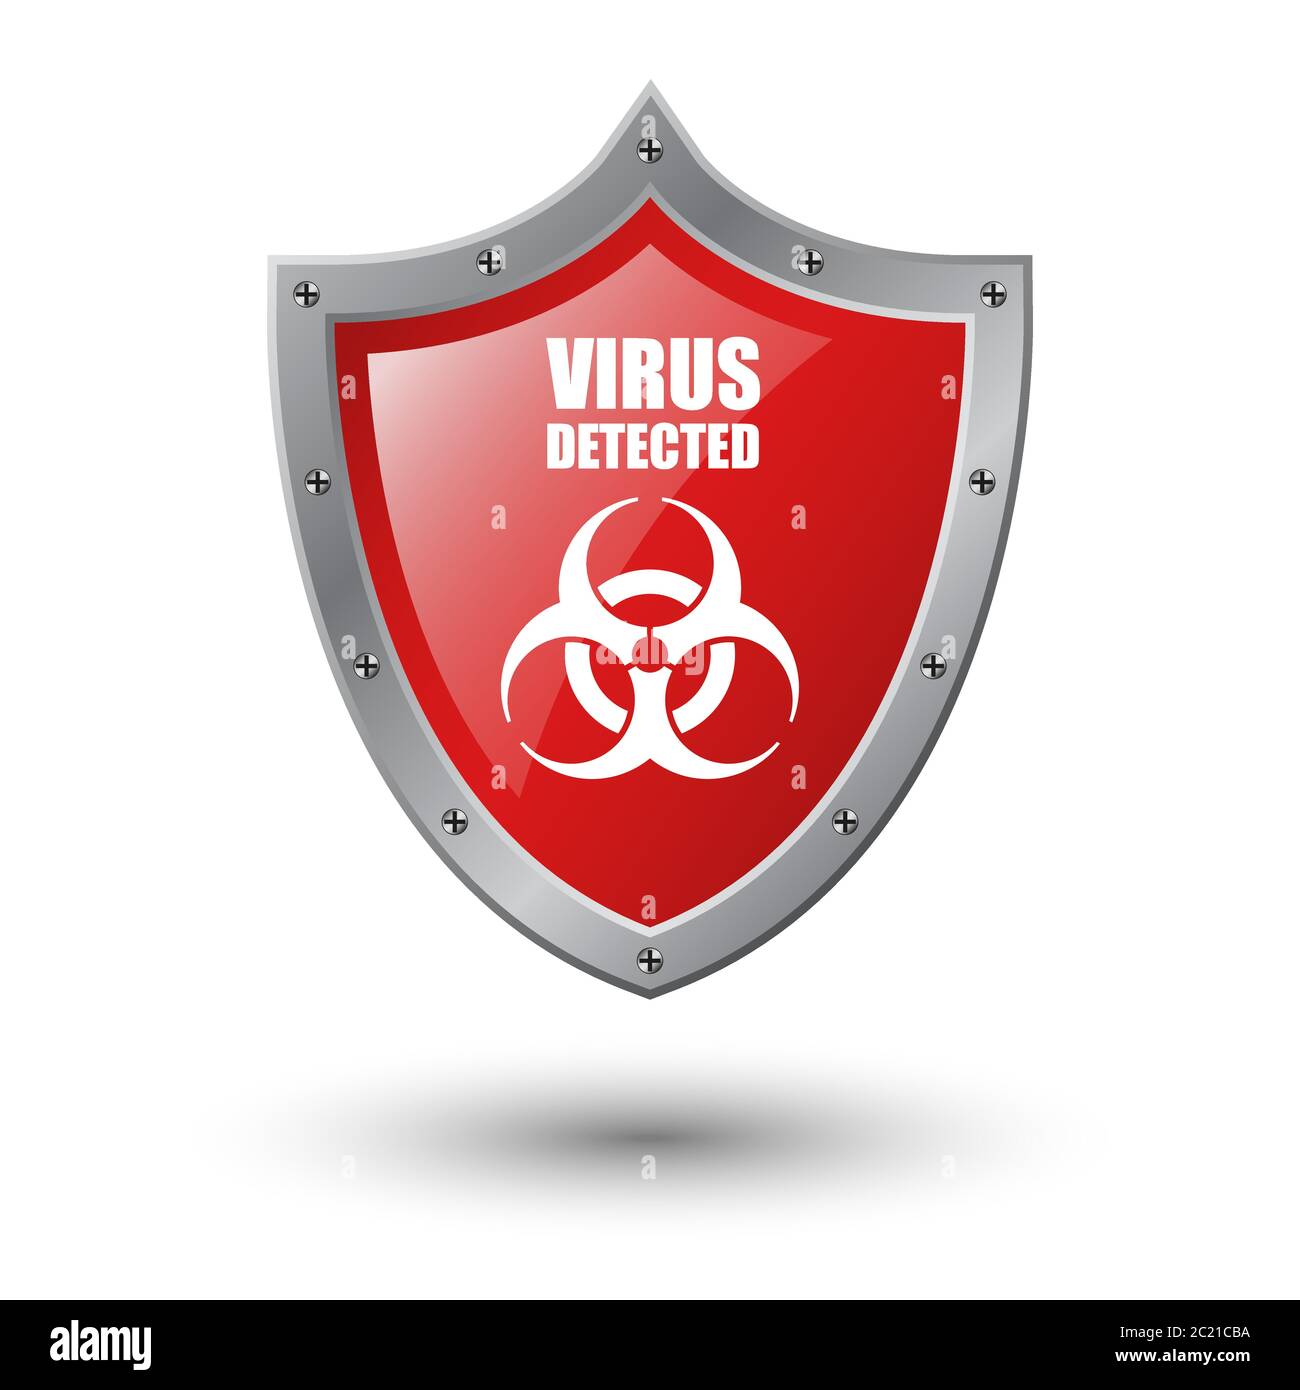 Virus detected on red shield isolated on white background, vector illustration Stock Vector